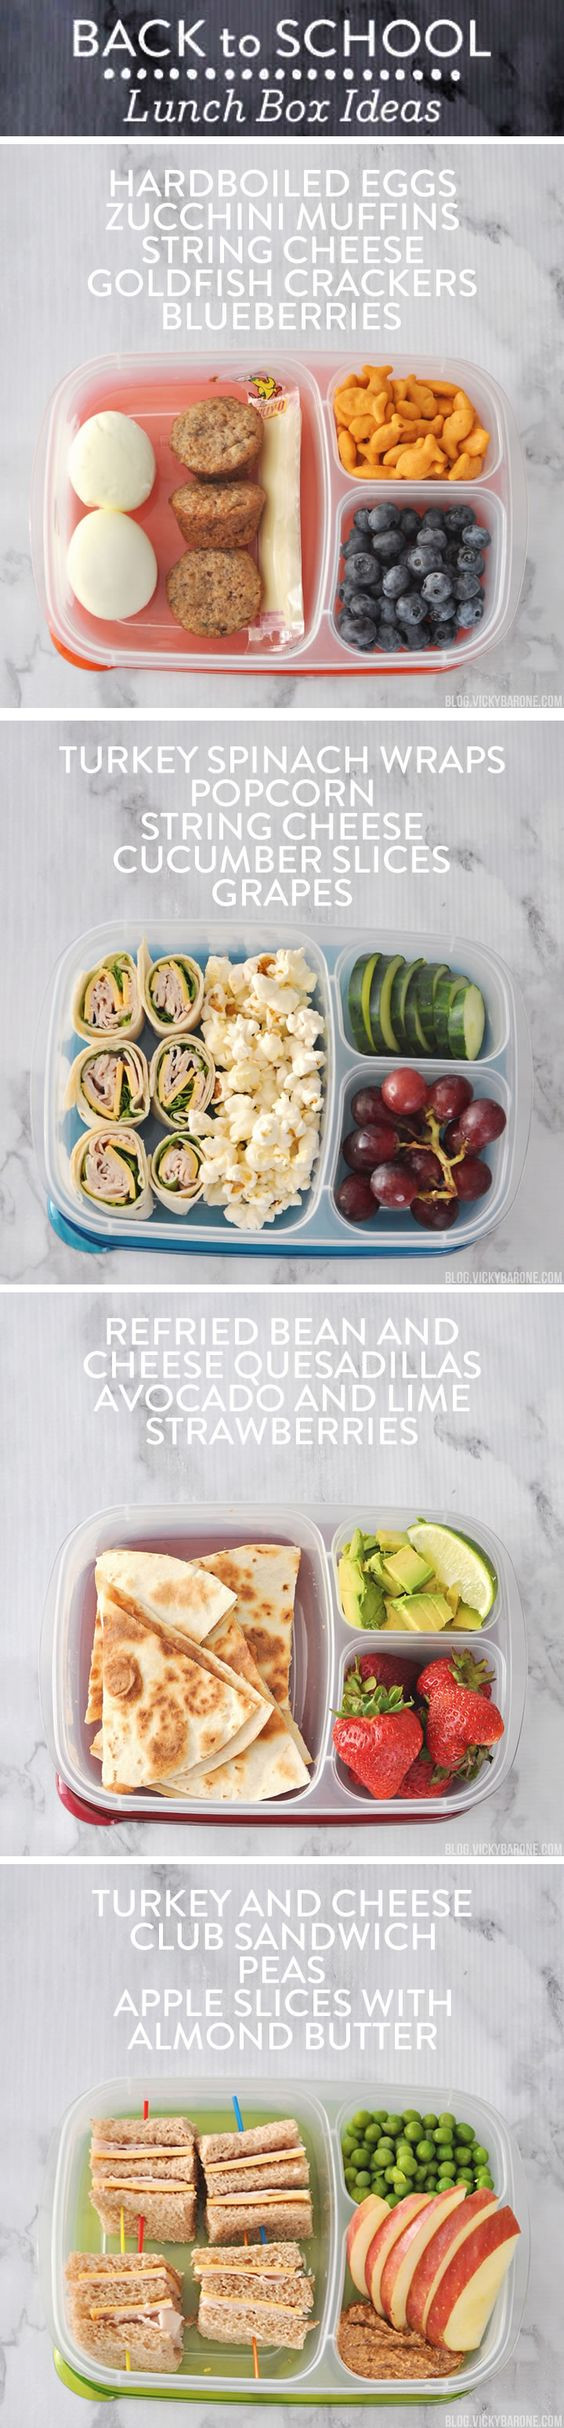 Yummy Healthy Lunches
 Smart and Yummy lunch ideas